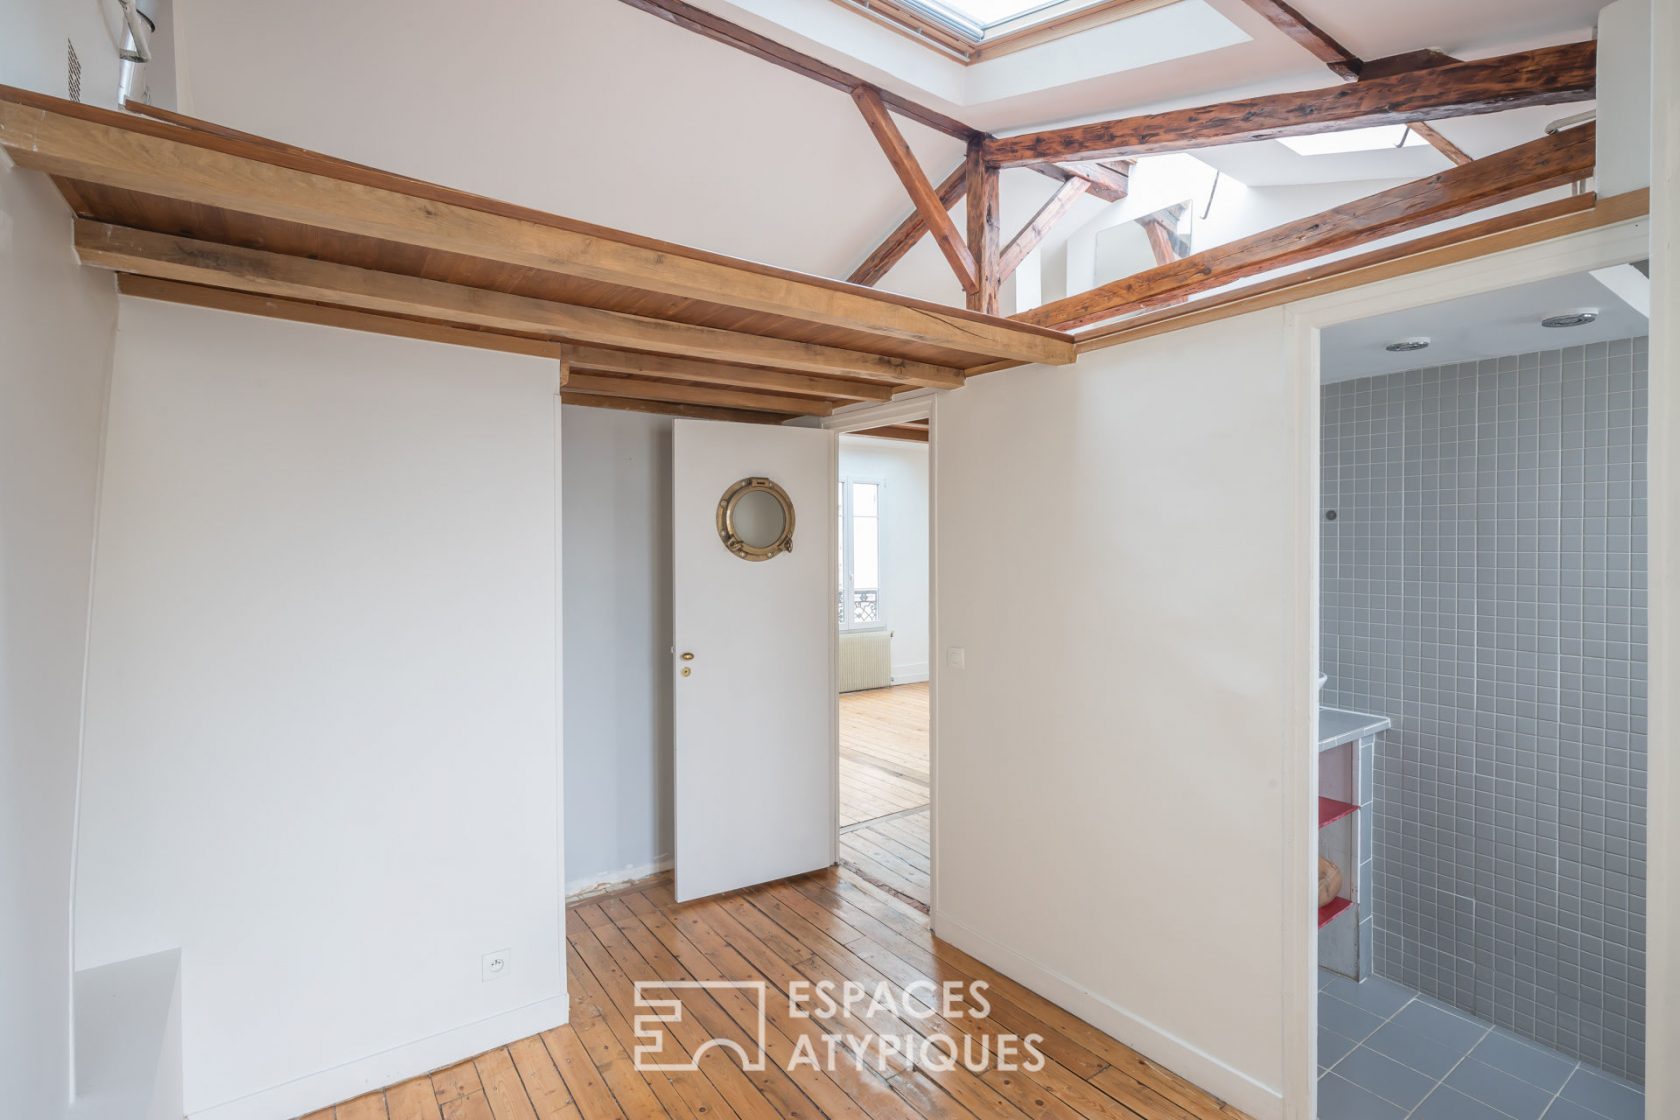 Top floor under the roof with a mezzanine